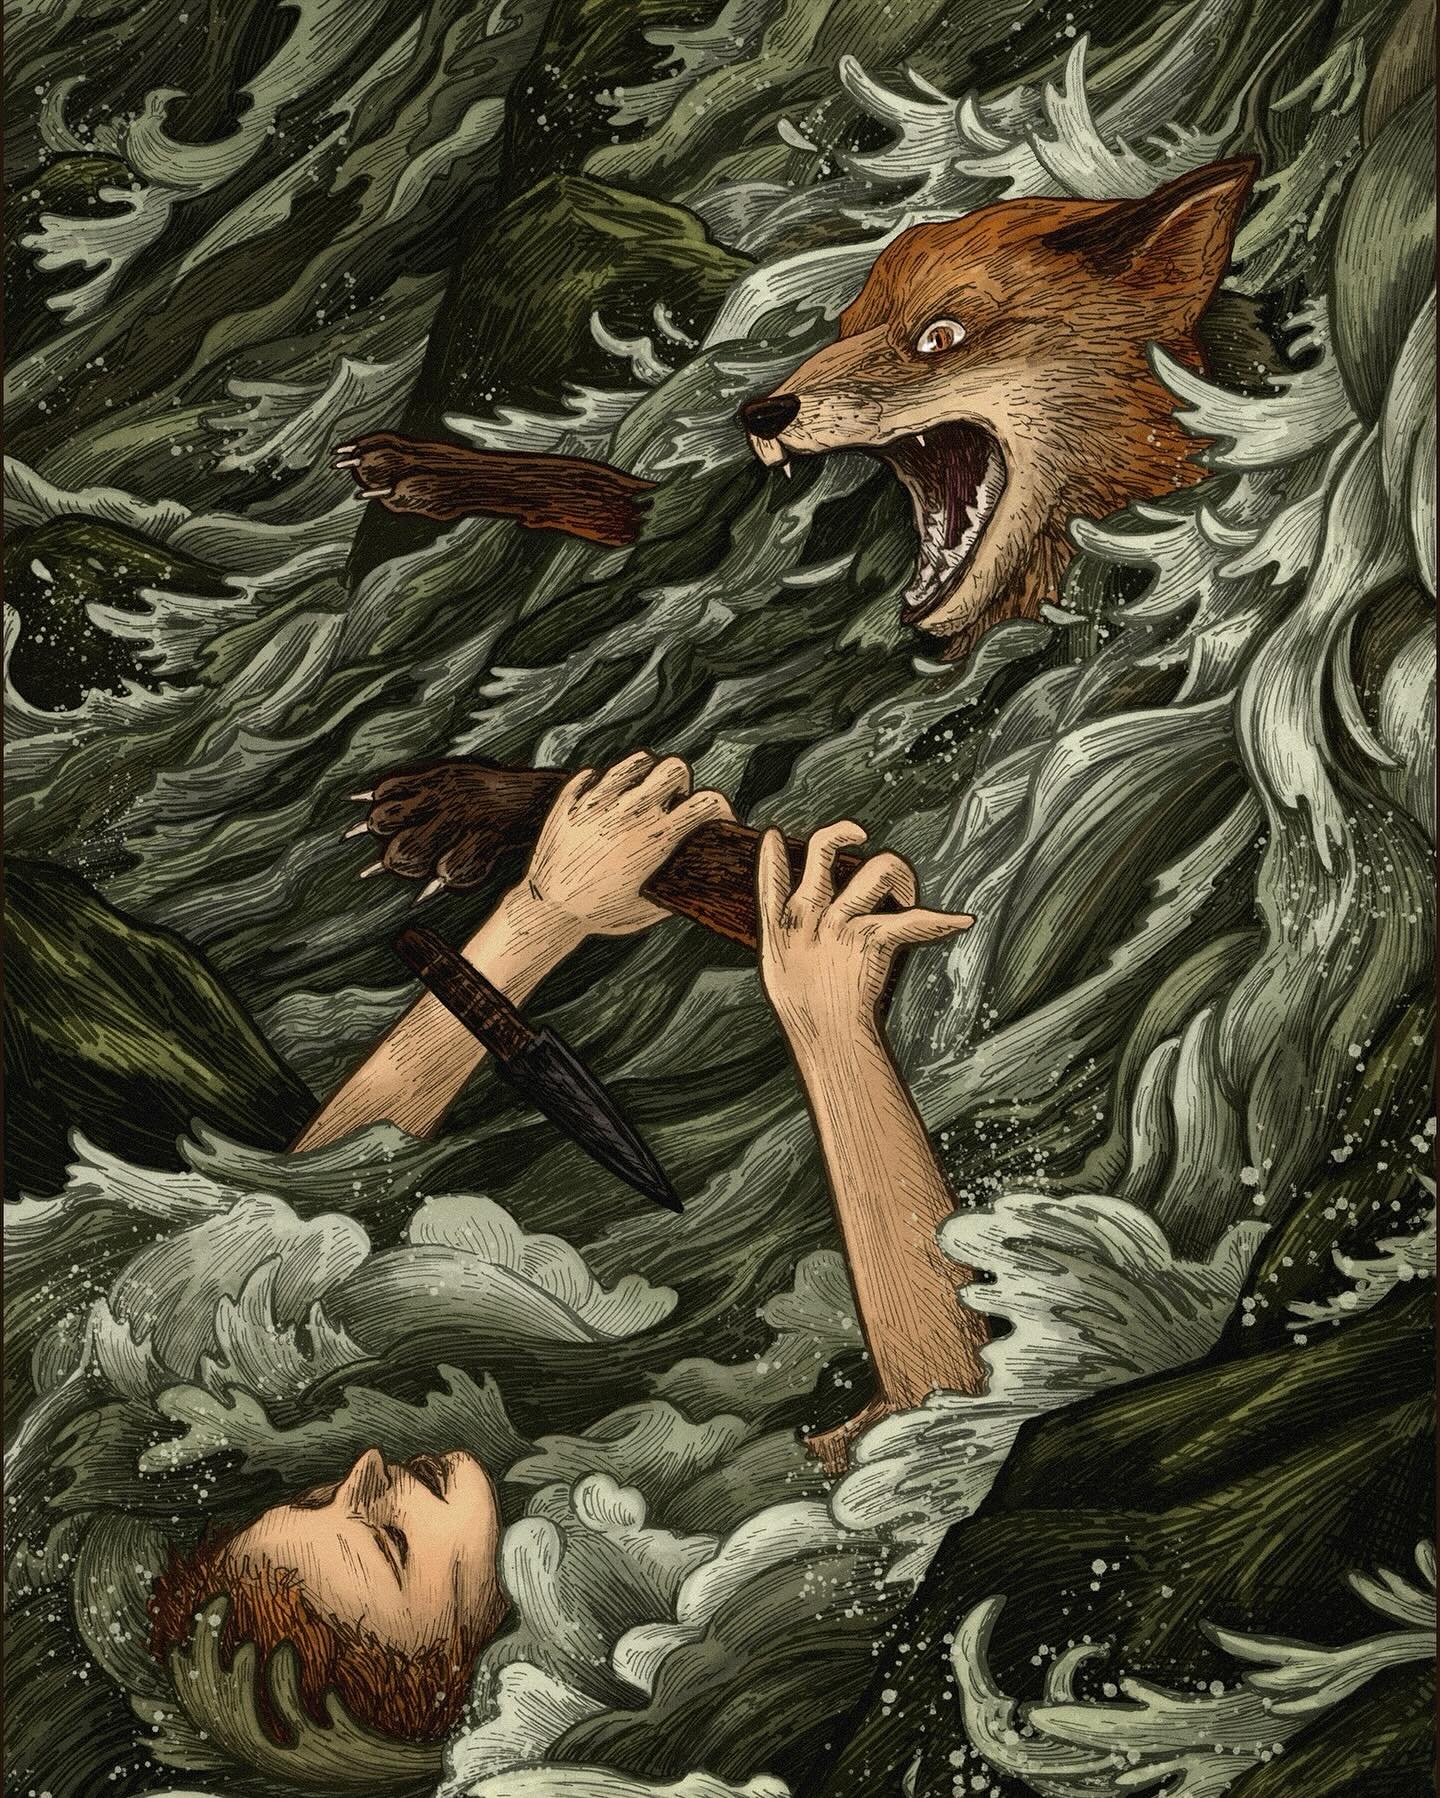 .

One of seven illustrations created for Suntup Edition&rsquo;s limited publication of Winterset Hollow by Jonathan Edward Durham. 

.
#wintersethollow #illustration #illustrator #folkart #darkfantasy #darkfantasyart #darkfantasybooks #fox #waterfal